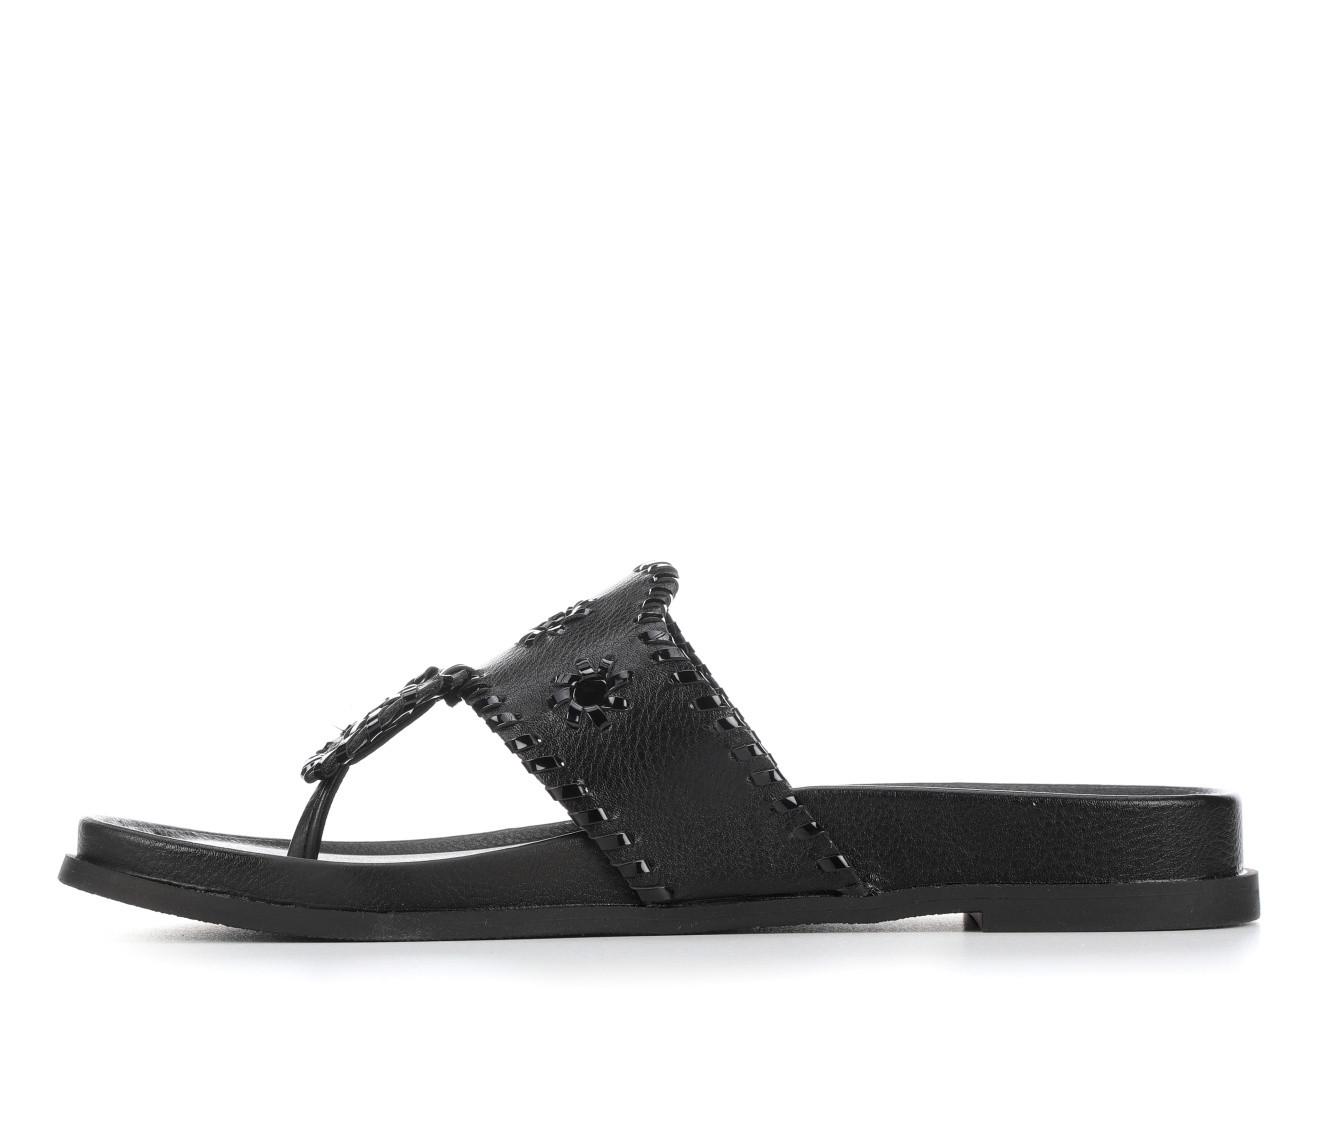 Women's Y-Not Beaming Footbed Sandals